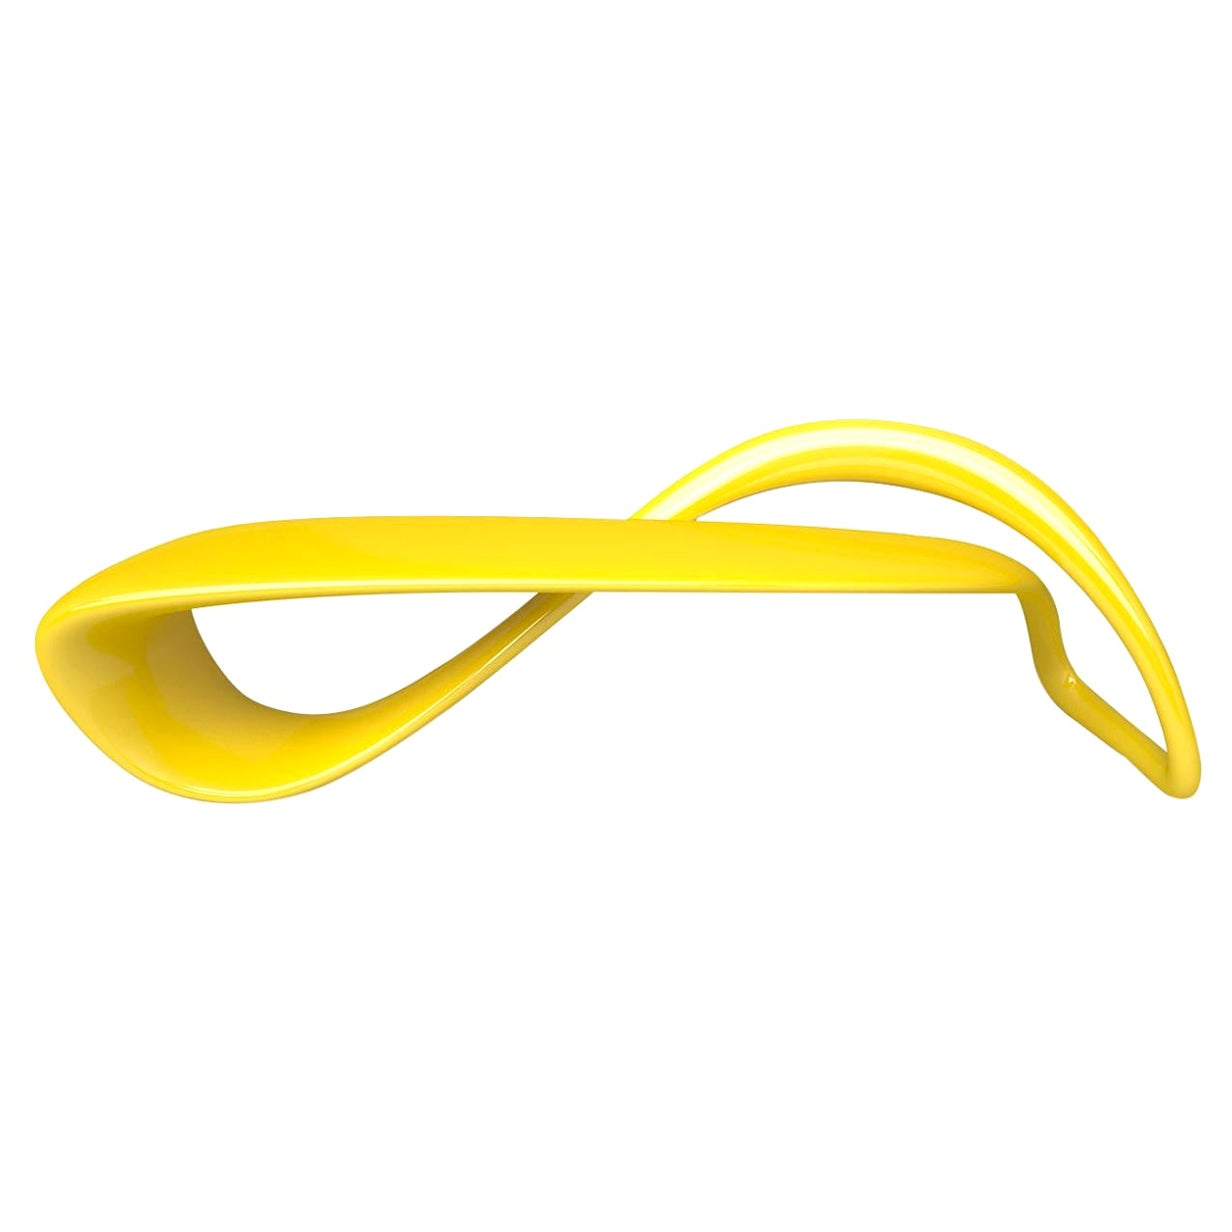 E-Turn, Lacquered Fibreglass Sculptural Bench Seat in Yellow by Brodie Neill